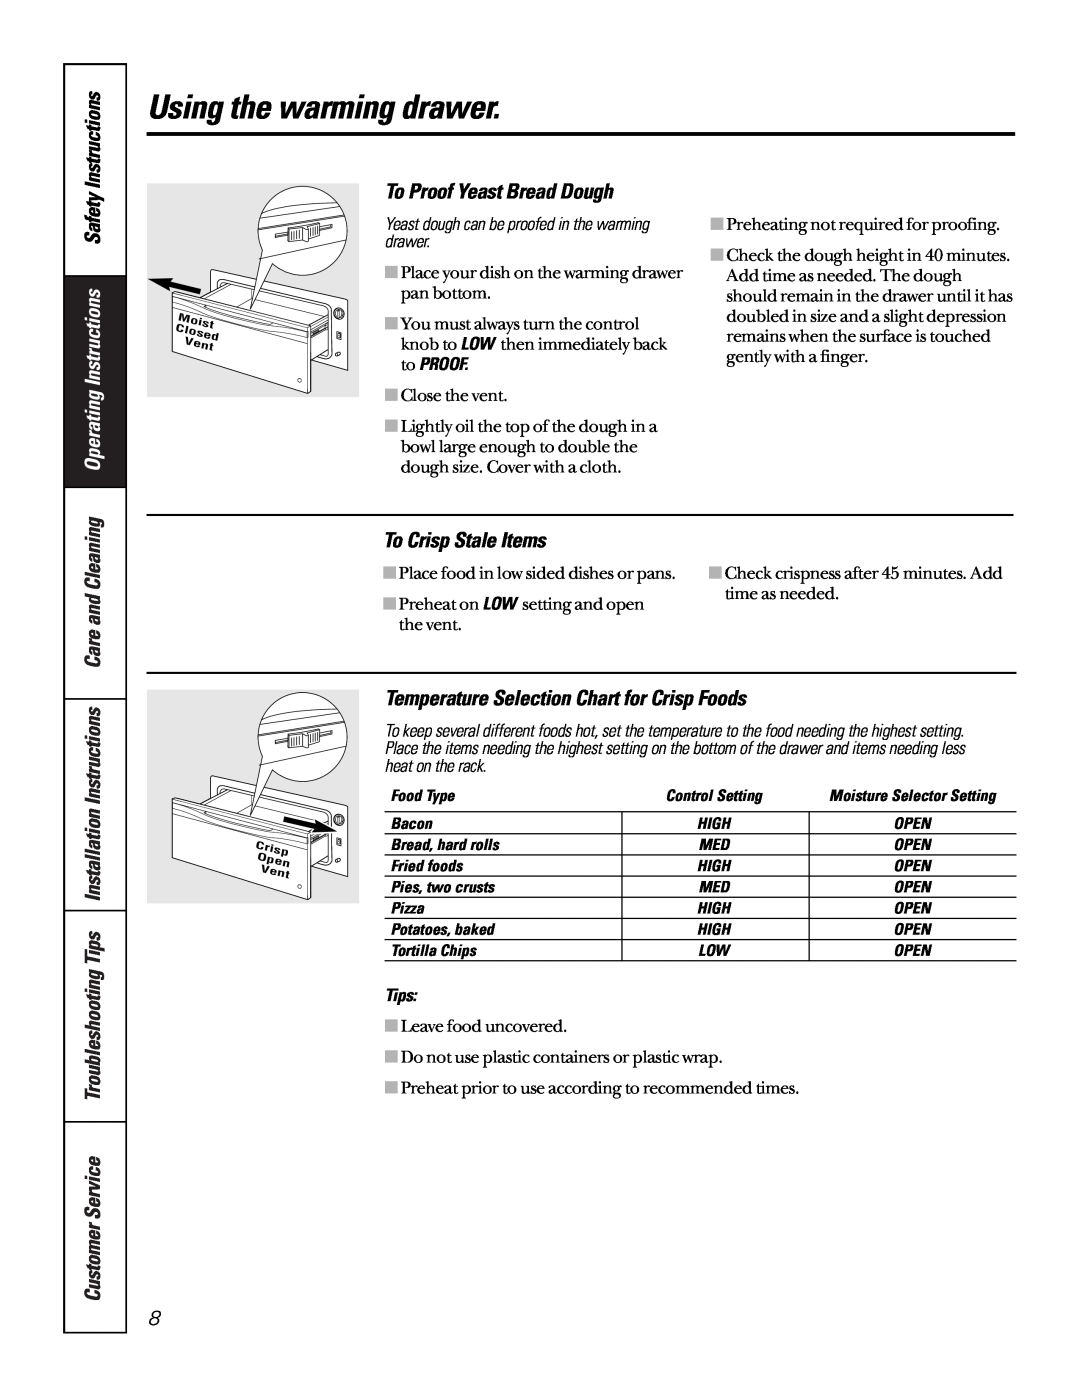 GE JKD910 Instructions, To Proof Yeast Bread Dough, To Crisp Stale Items, Temperature Selection Chart for Crisp Foods 